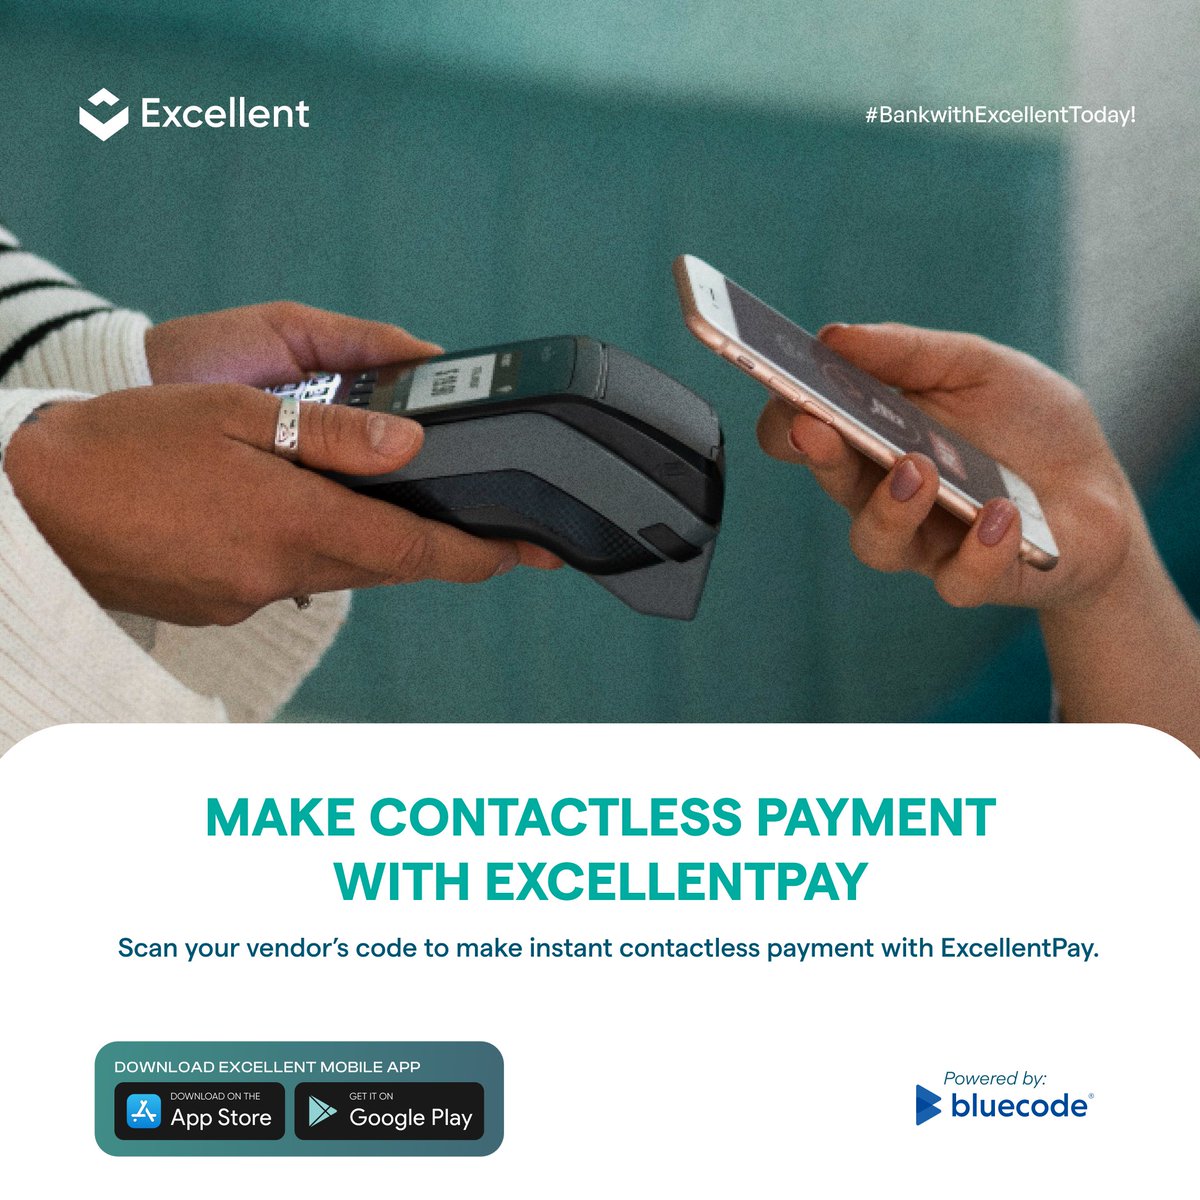 Card-less and Swift Payment.
.
.
.
.
Download Today to get Started.
#excellentbank #BankTransactions #BankingMadeEasy #bankwithexcellent #bankingawareness #ContactlessPayments